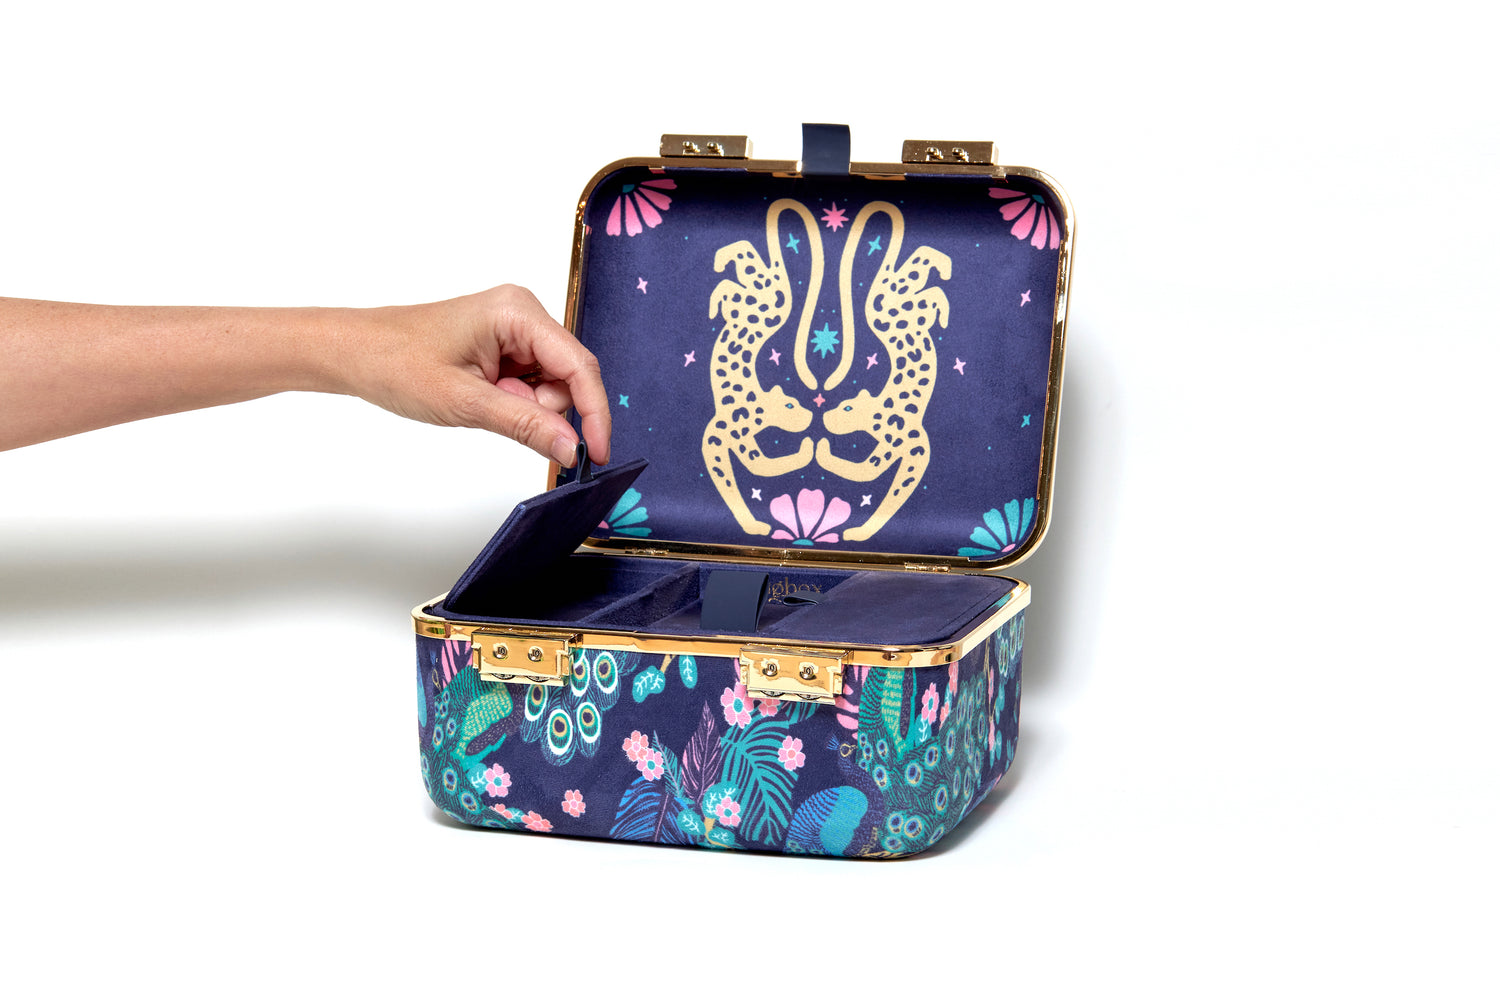 A lockbox for all your animal spirits. Our peacock print stash box is wrapped soft ultra-suede and vegan leather. 100% animal cruelty-free.